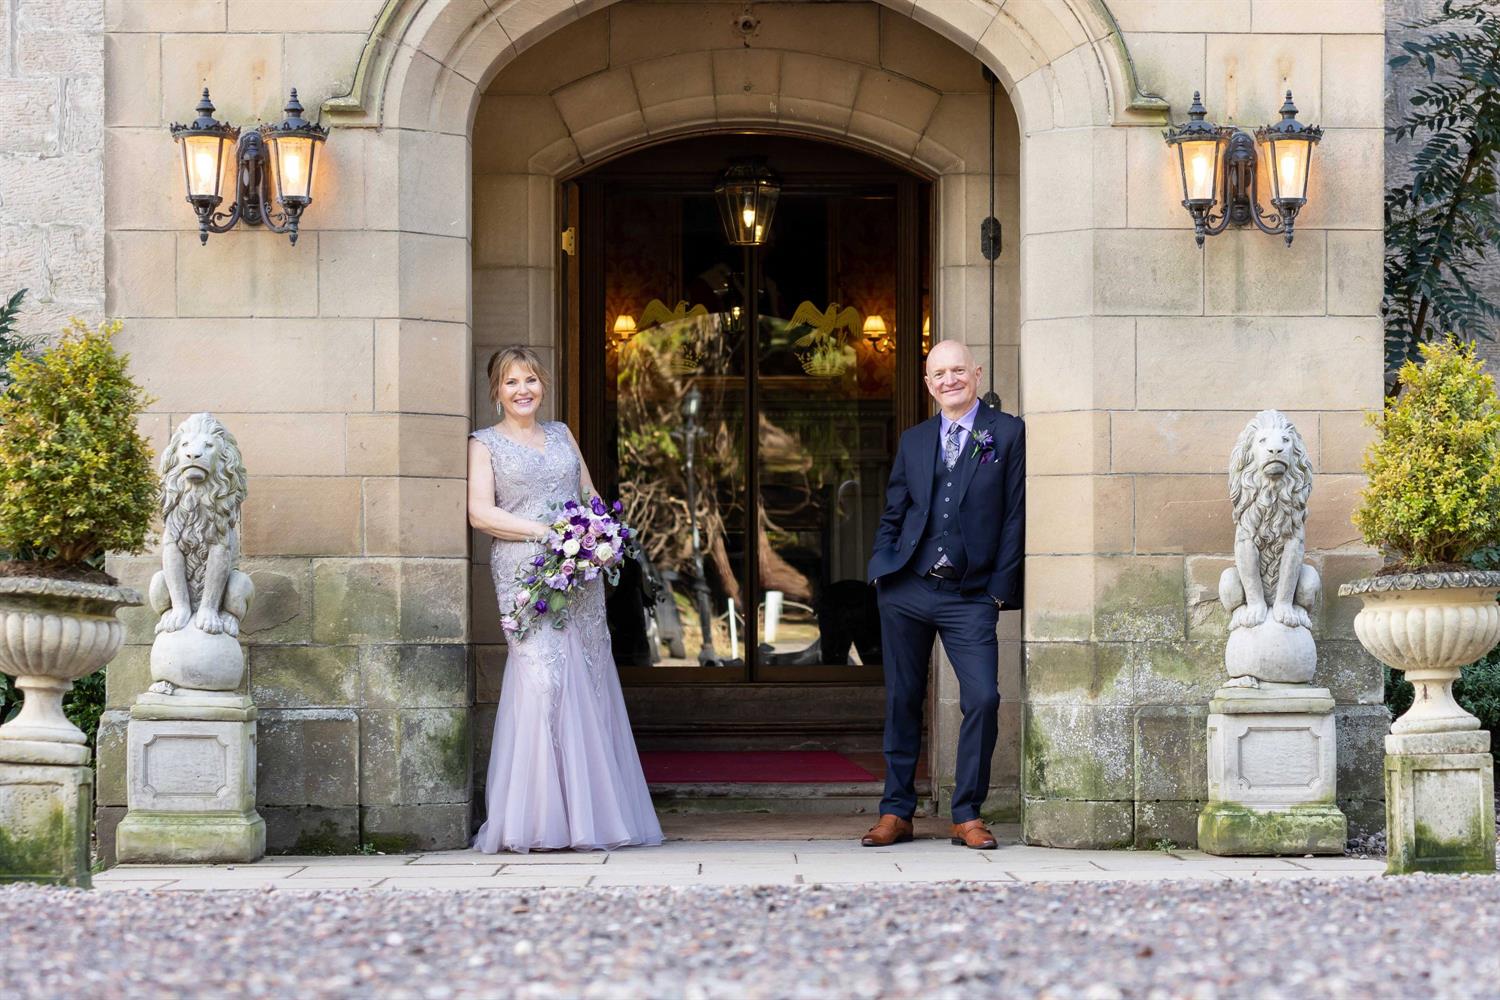 Bride and groom in the castle's entrance